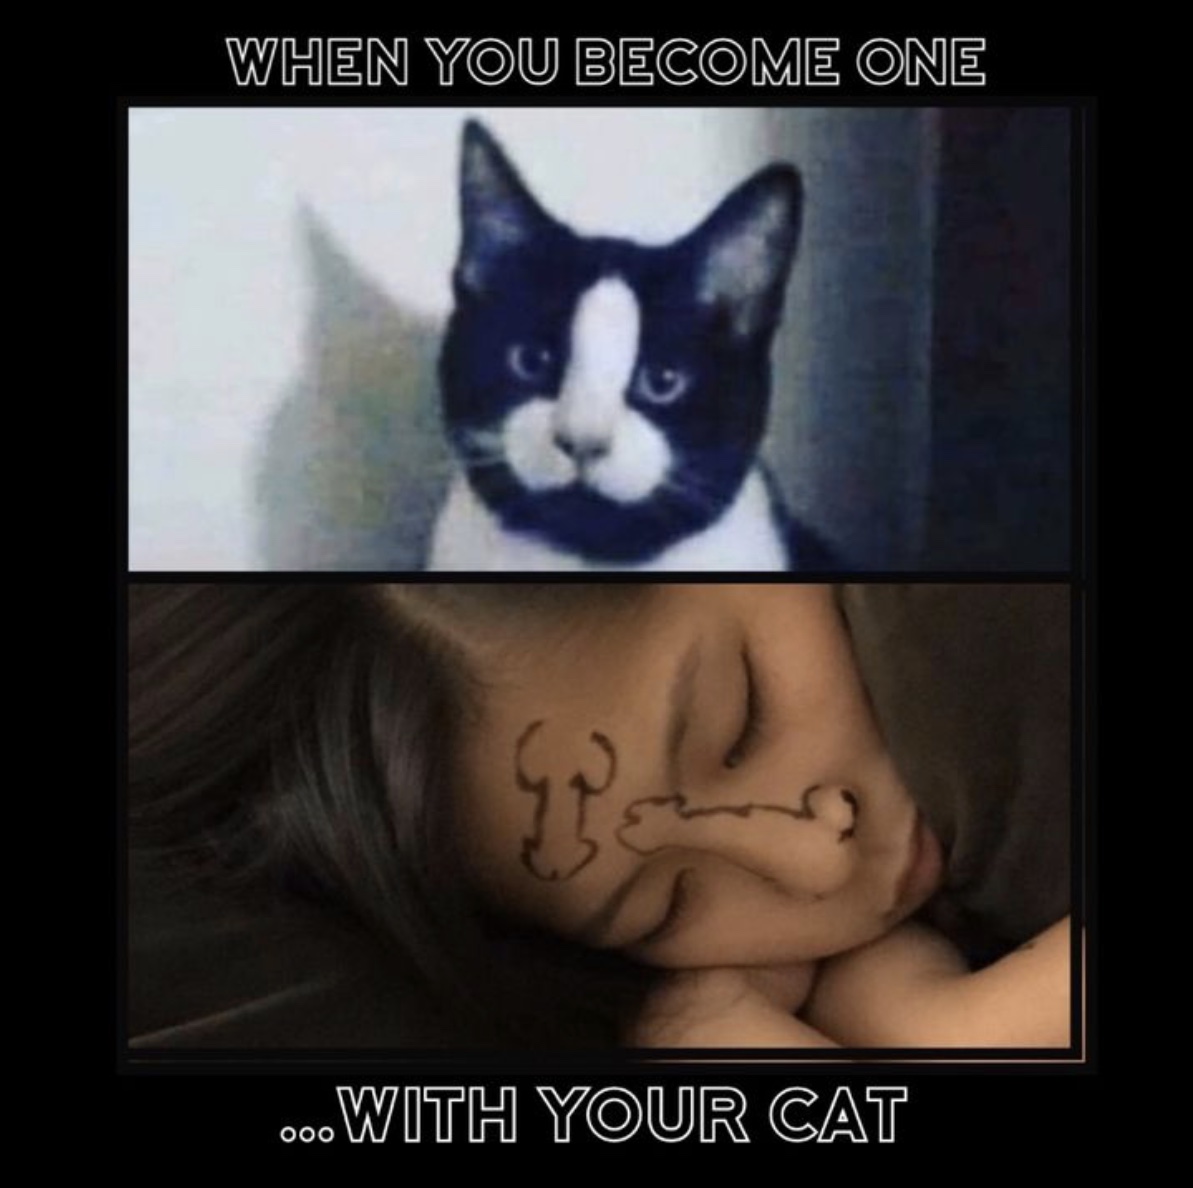 what's your cat's name dick face - When You Become One ... With Your Cat